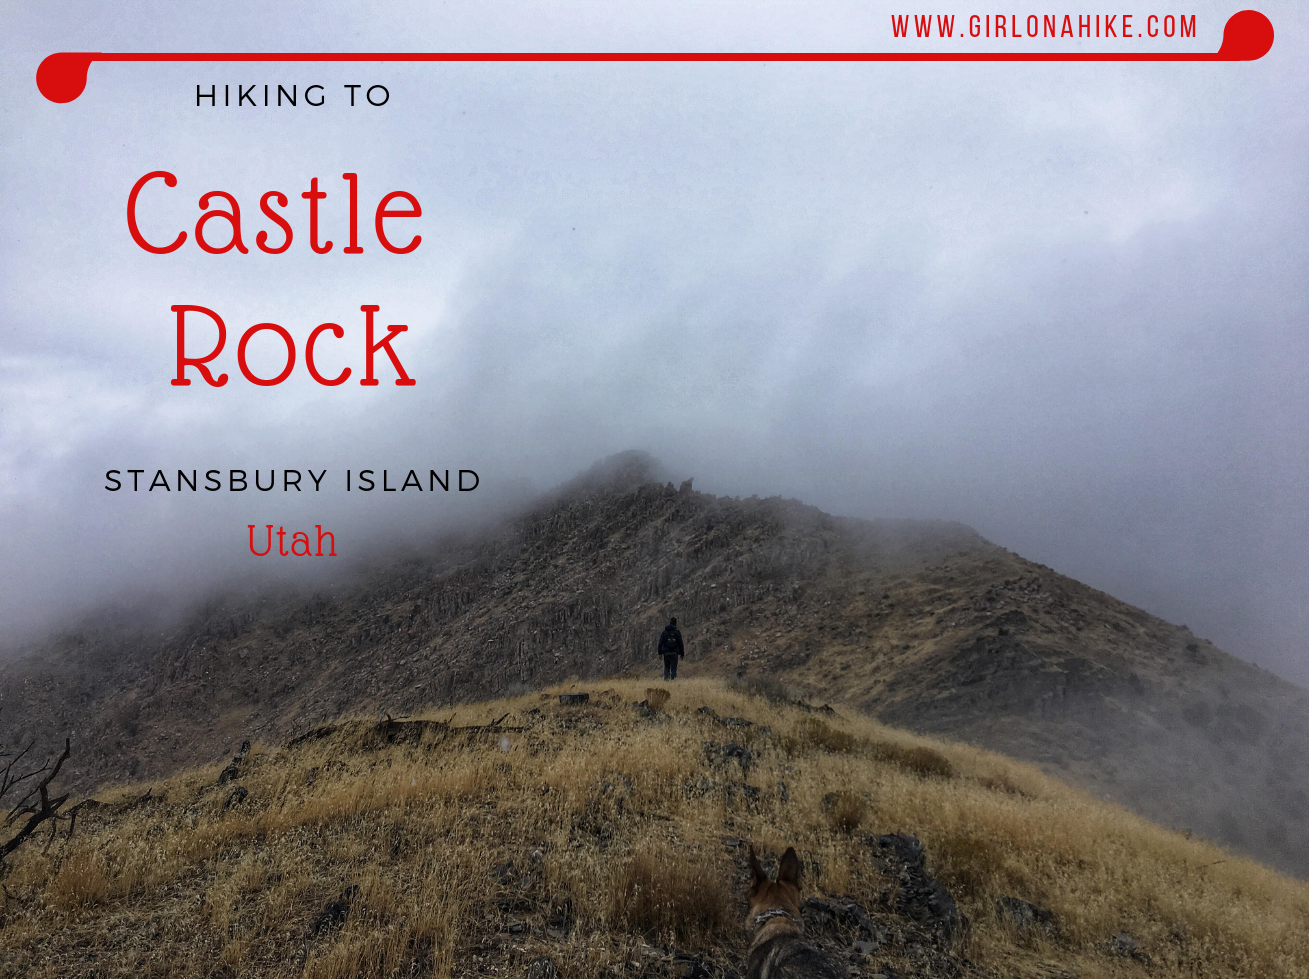 Hiking to Castle Rock, Stansbury Island